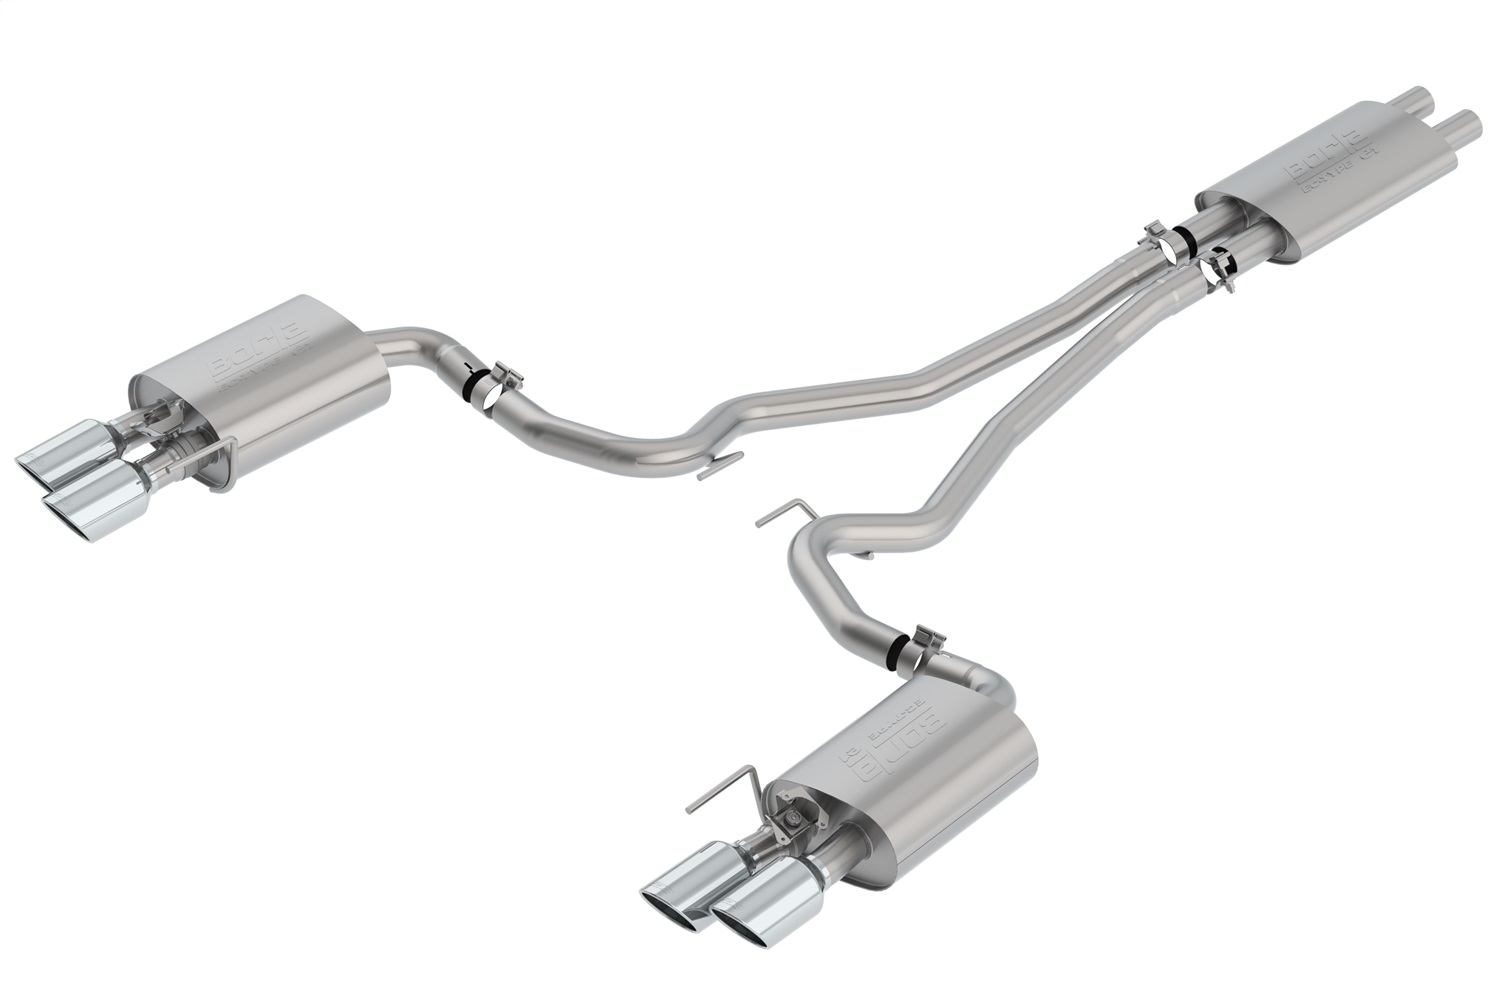 Borla 1014045 Touring Cat-Back Exhaust System Fits 18-23 Mustang